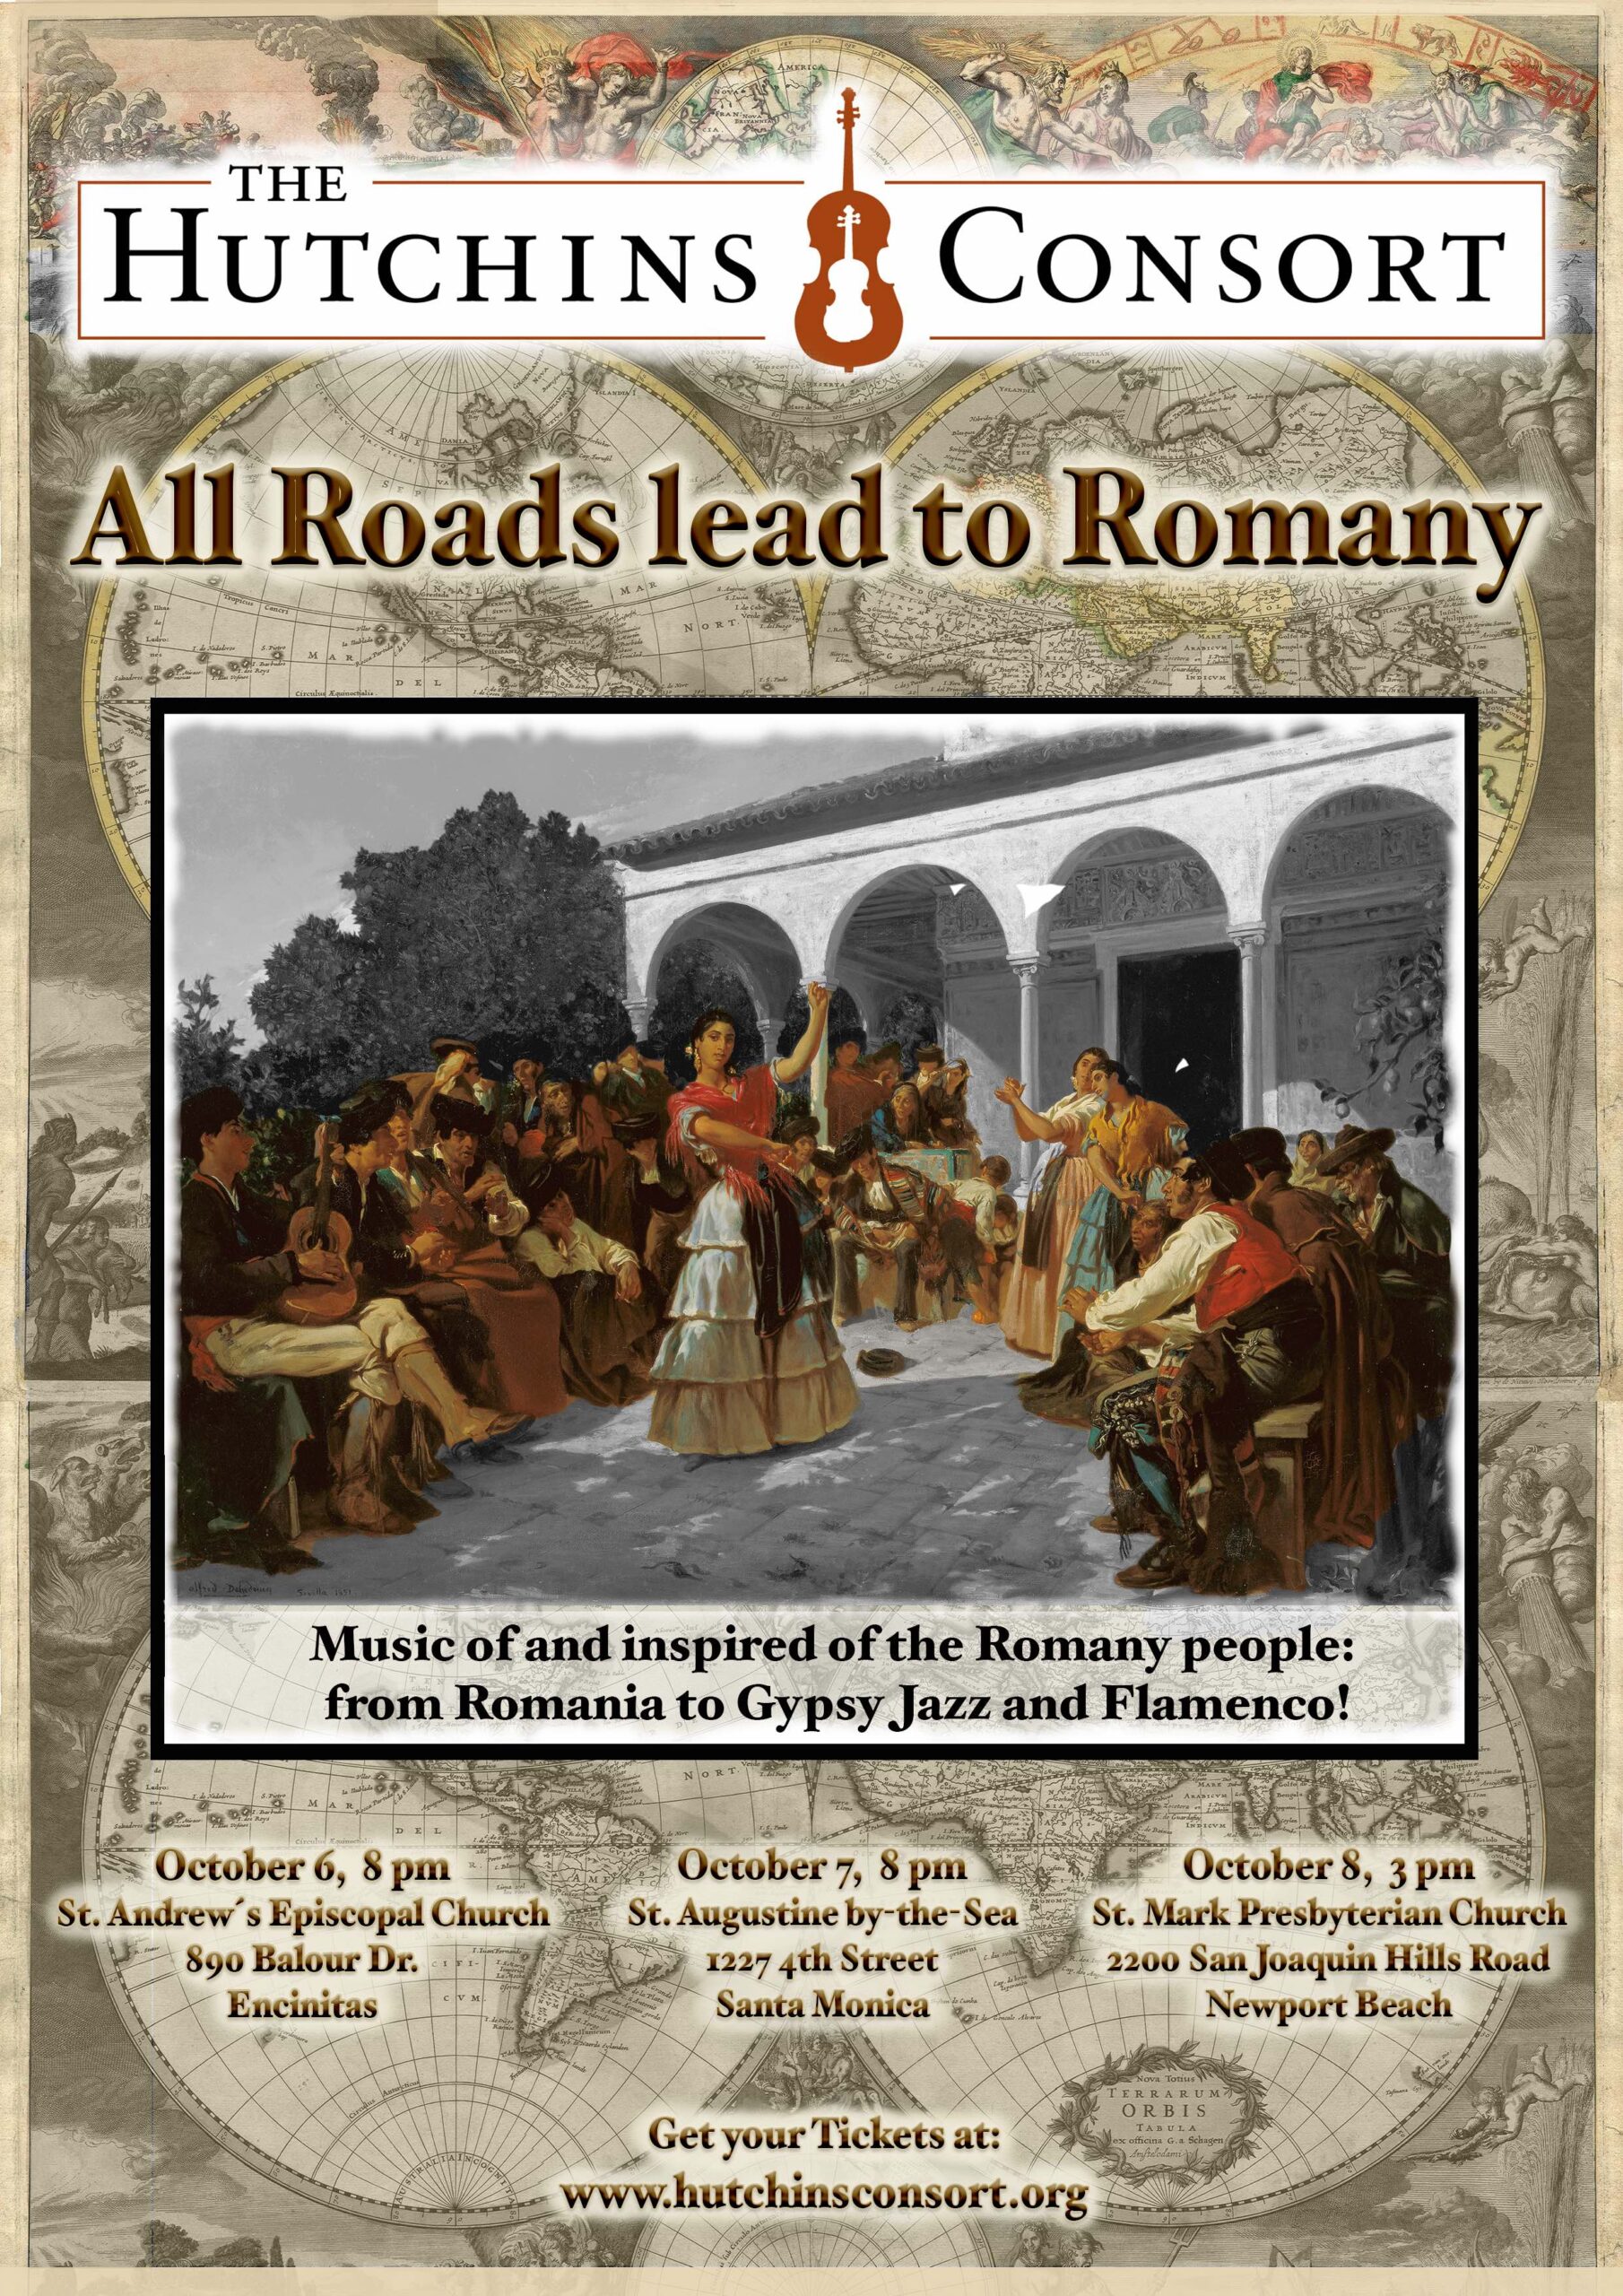 The Hutchins Consort presents: All Roads lead to Romany